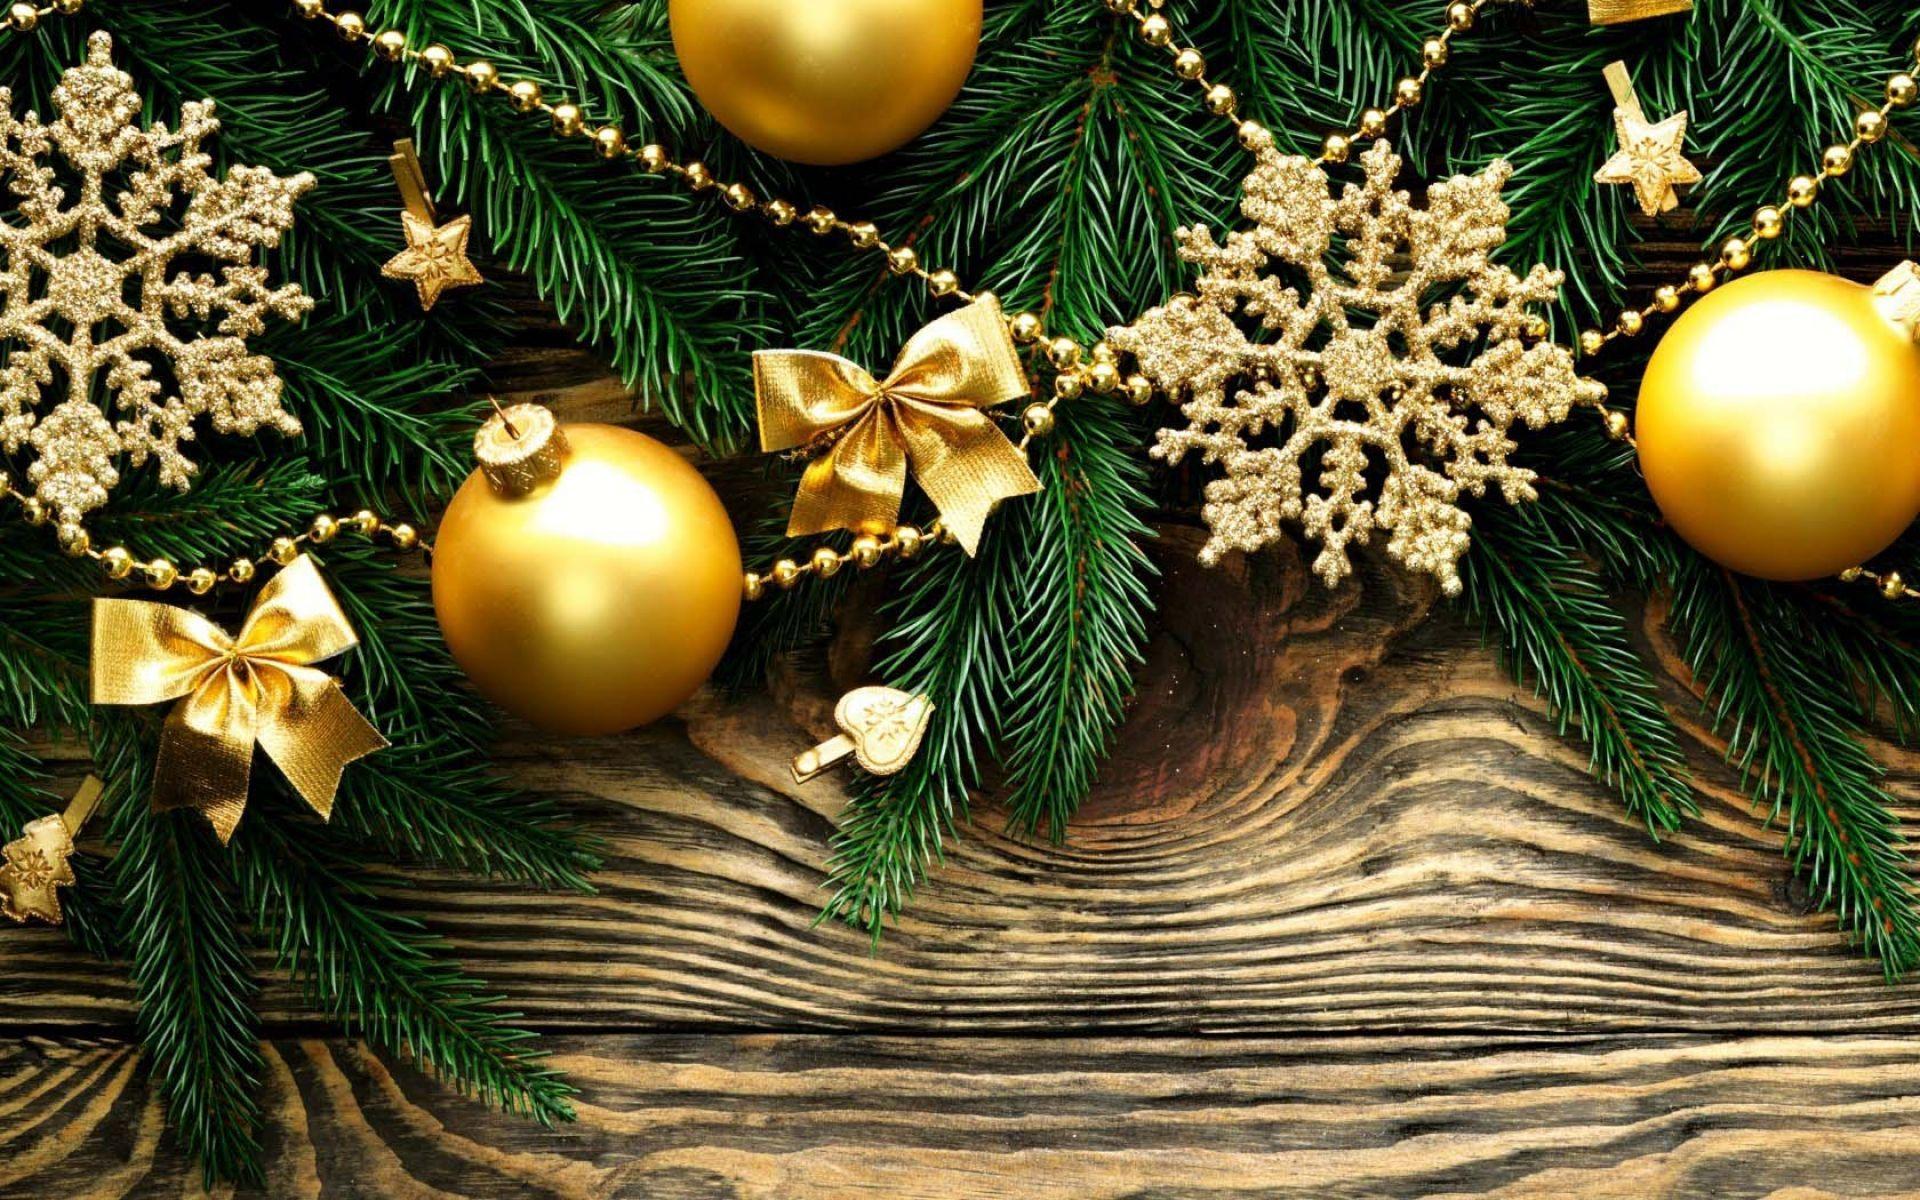 Christmas Balls With Gold And Snowflakes Wallpaper. HD Christmas Wallpaper for Mobile and Desktop